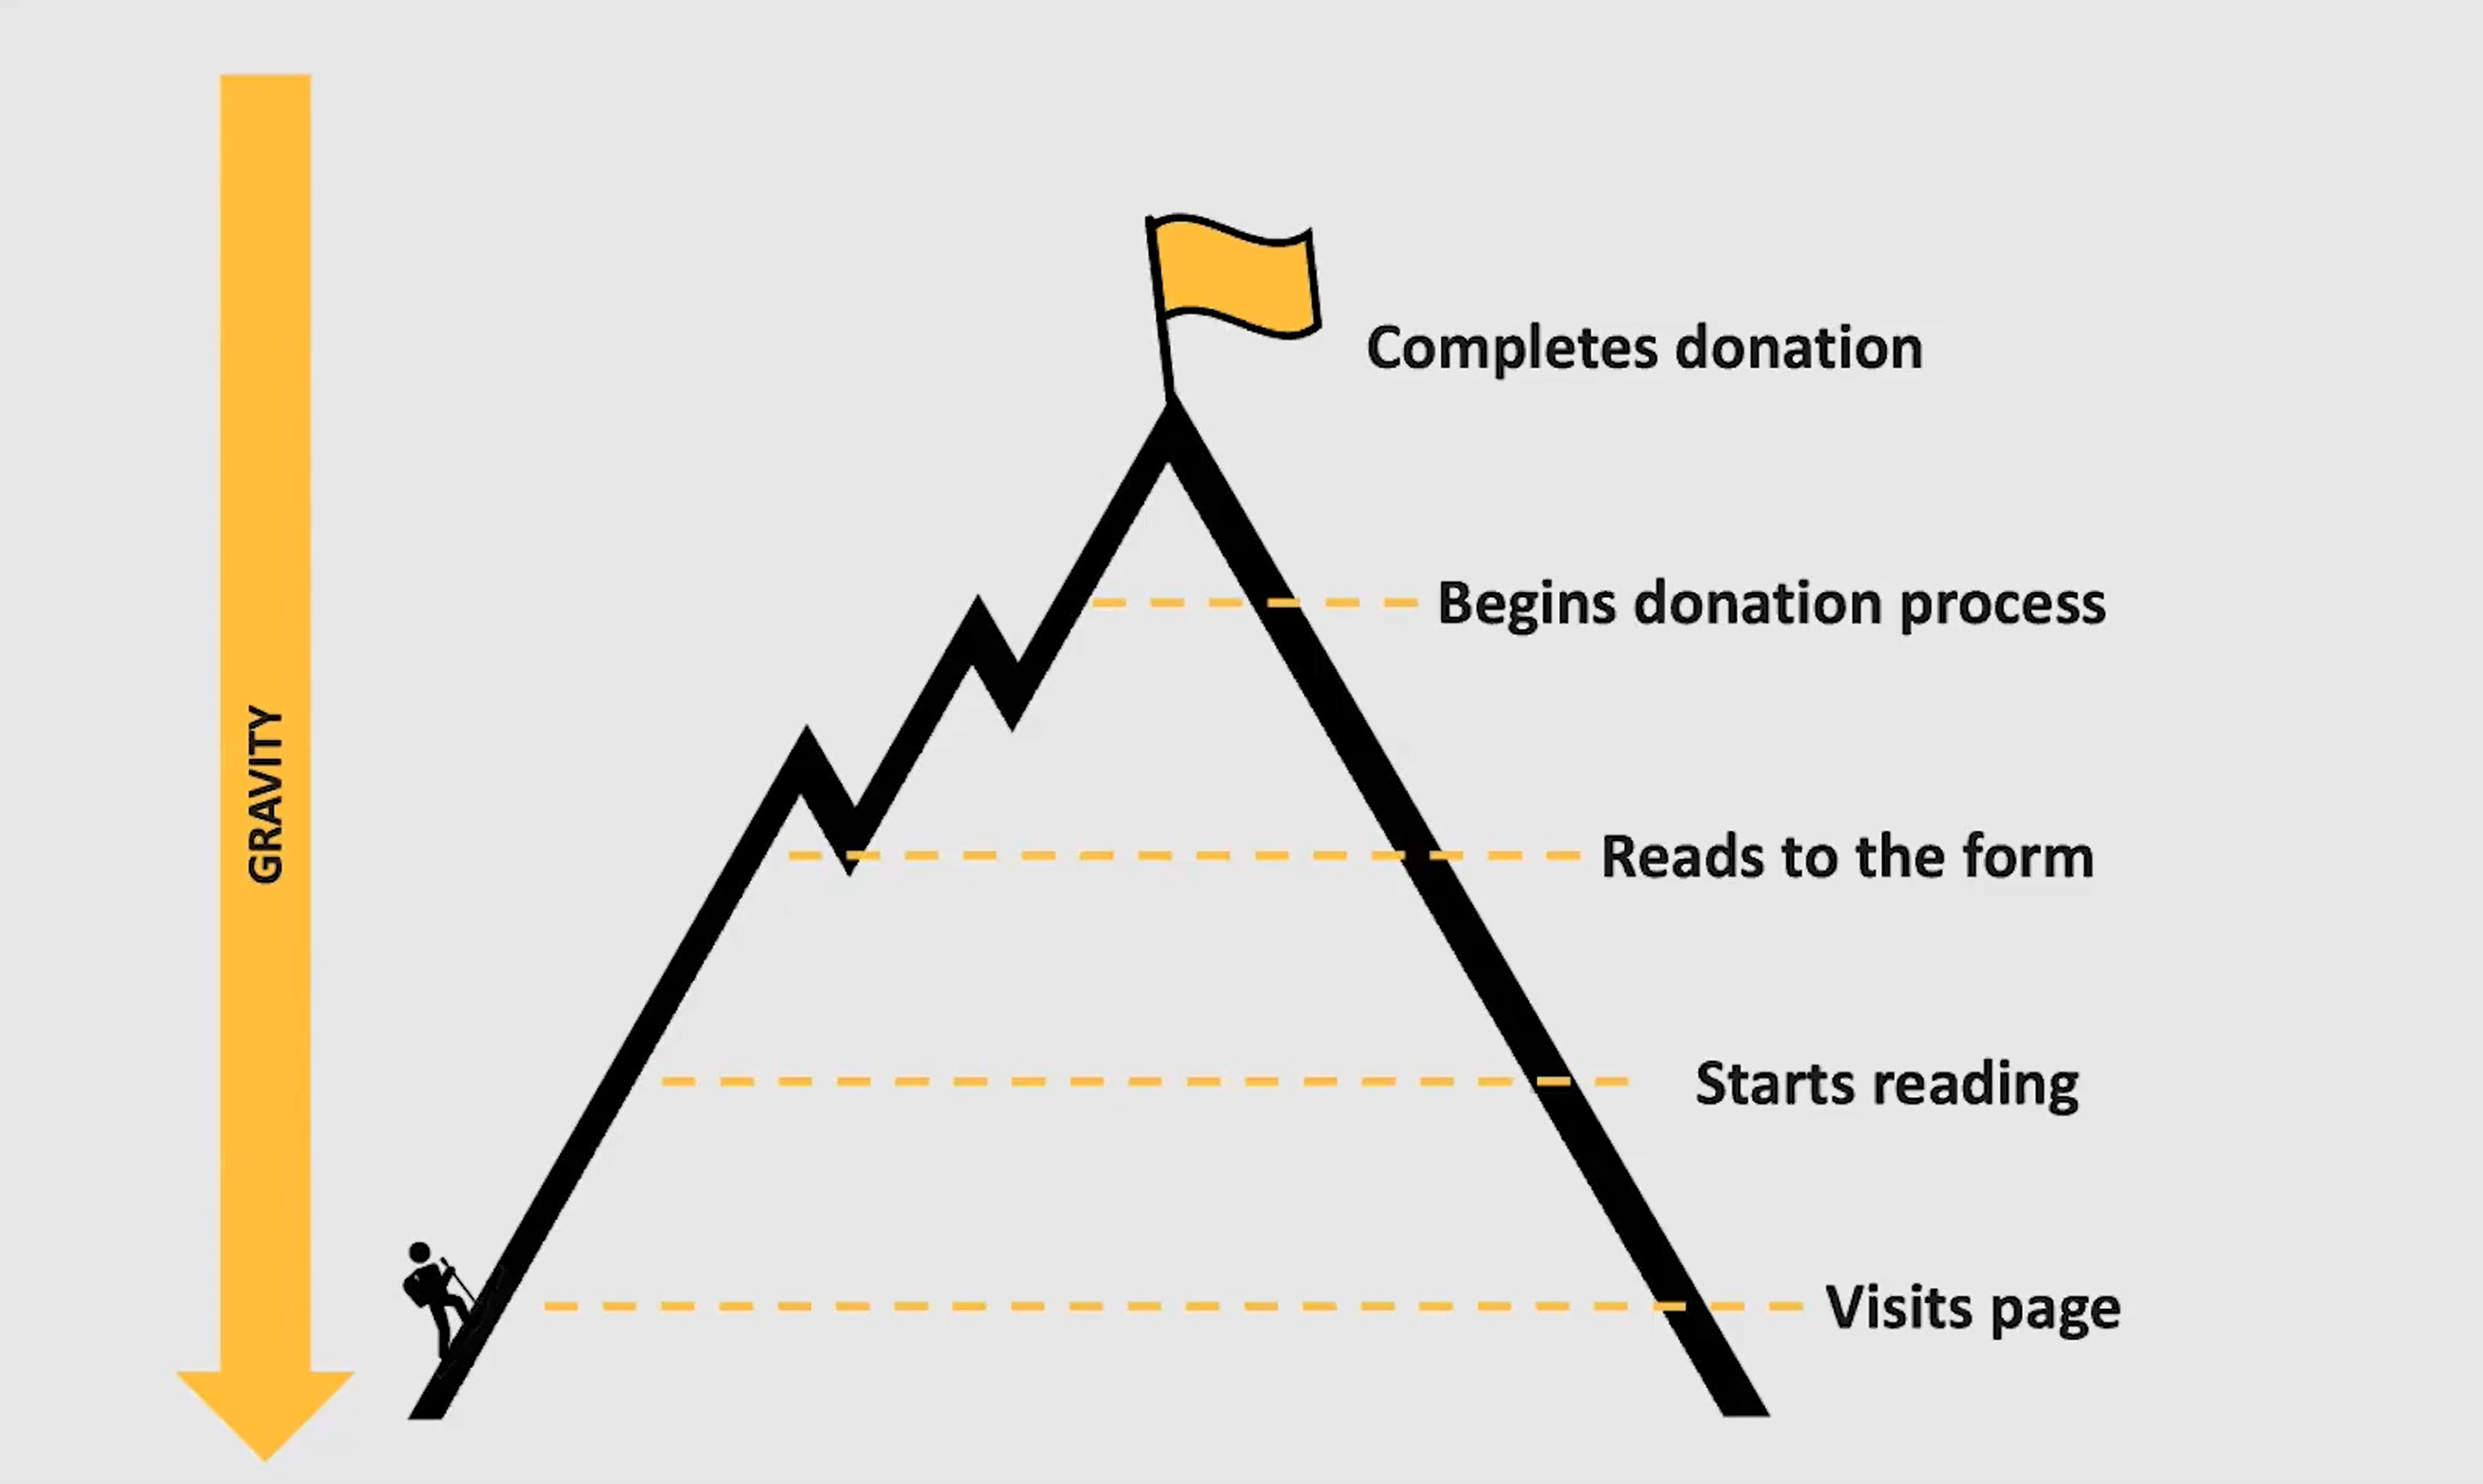 Gravity is pulling downward on a person climbing a mountain. They have to get through visiting a page, starting to read, reading through to the donation form, and starting the donation process before they complete their donation.